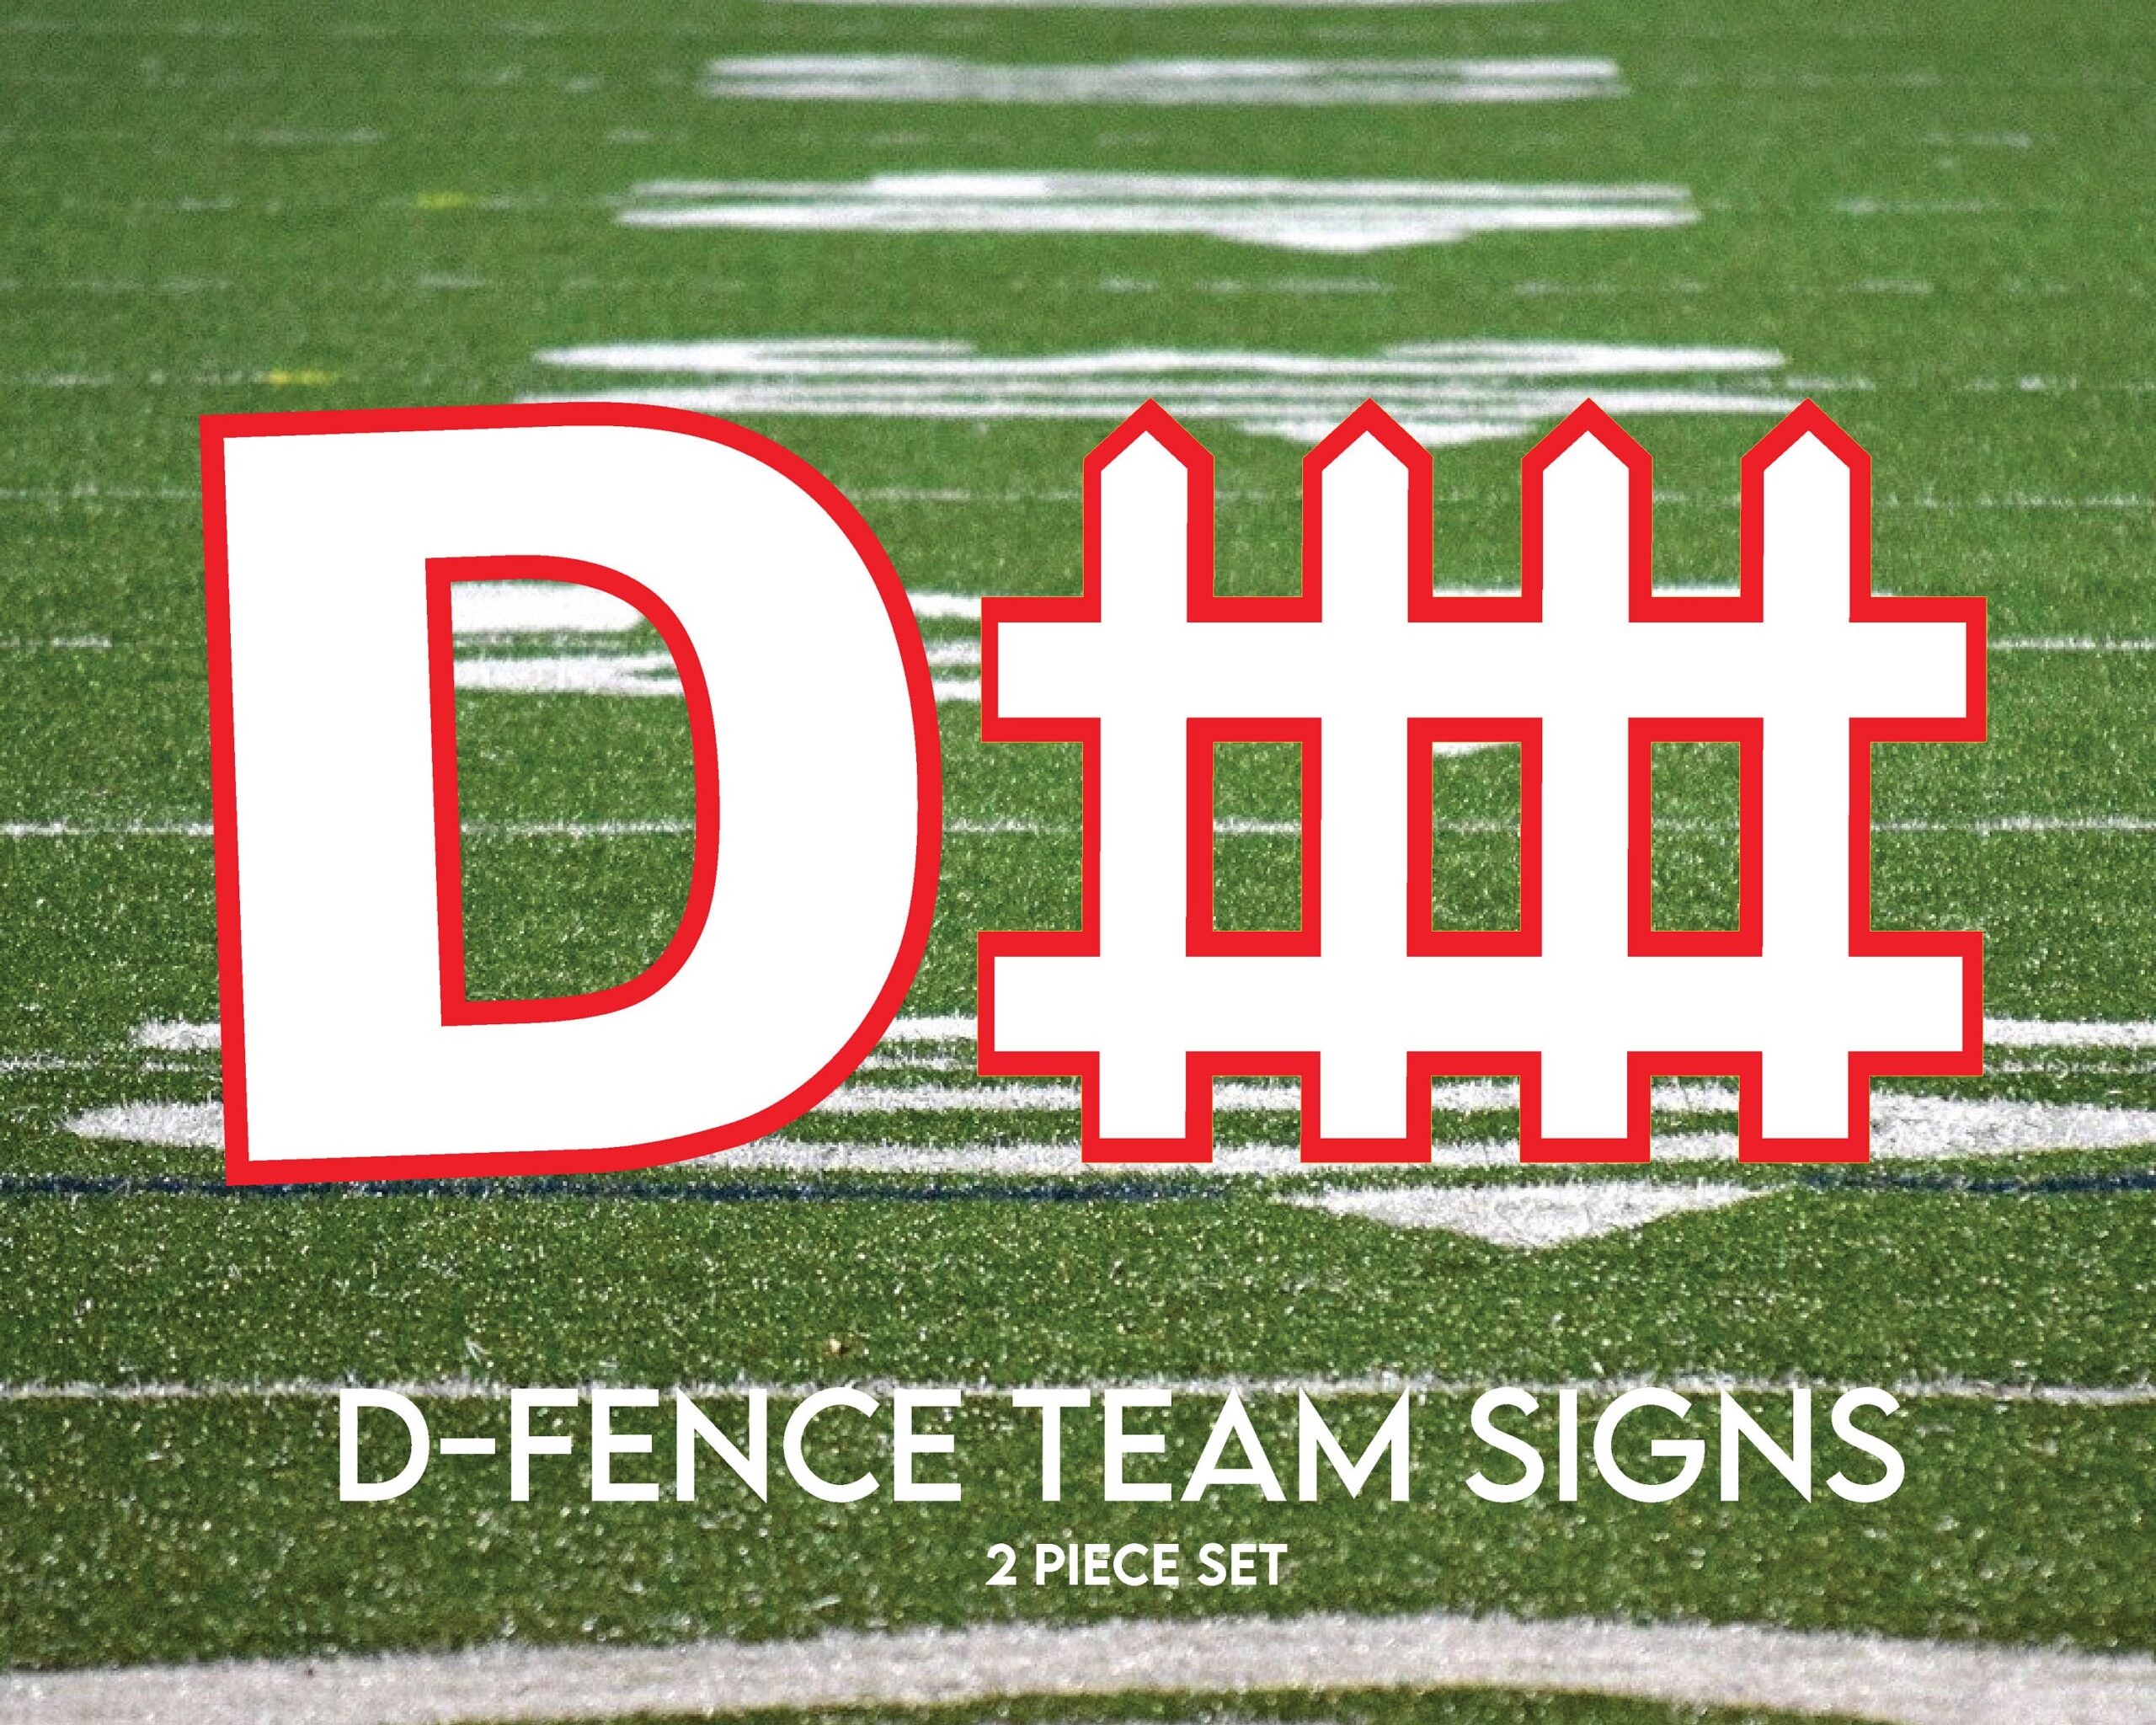 D-Fence Yard Signs Buy Online at Flexpress